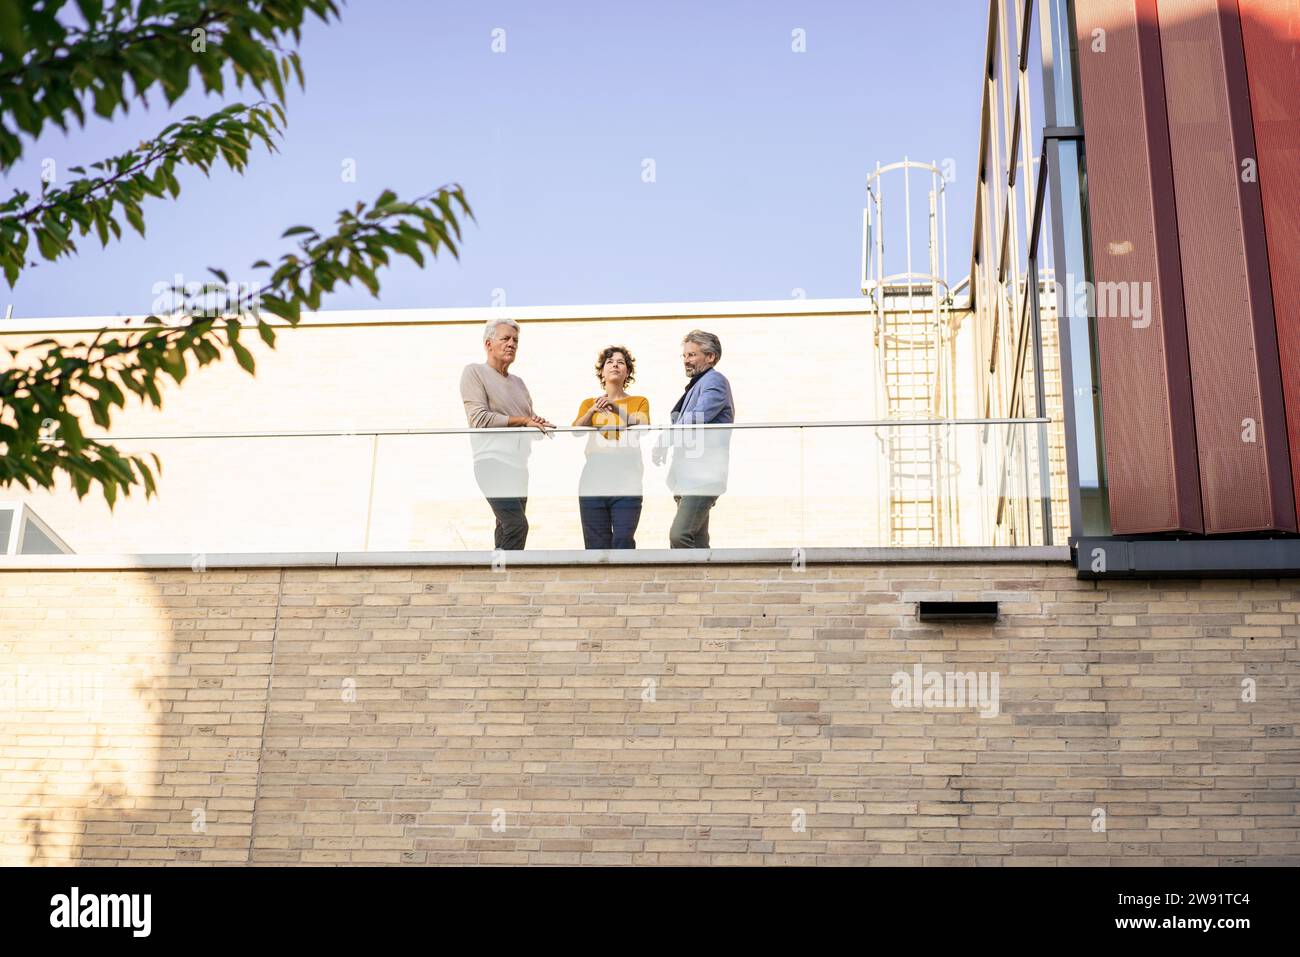 Business people discussing together on balcony at sunny day Stock Photo